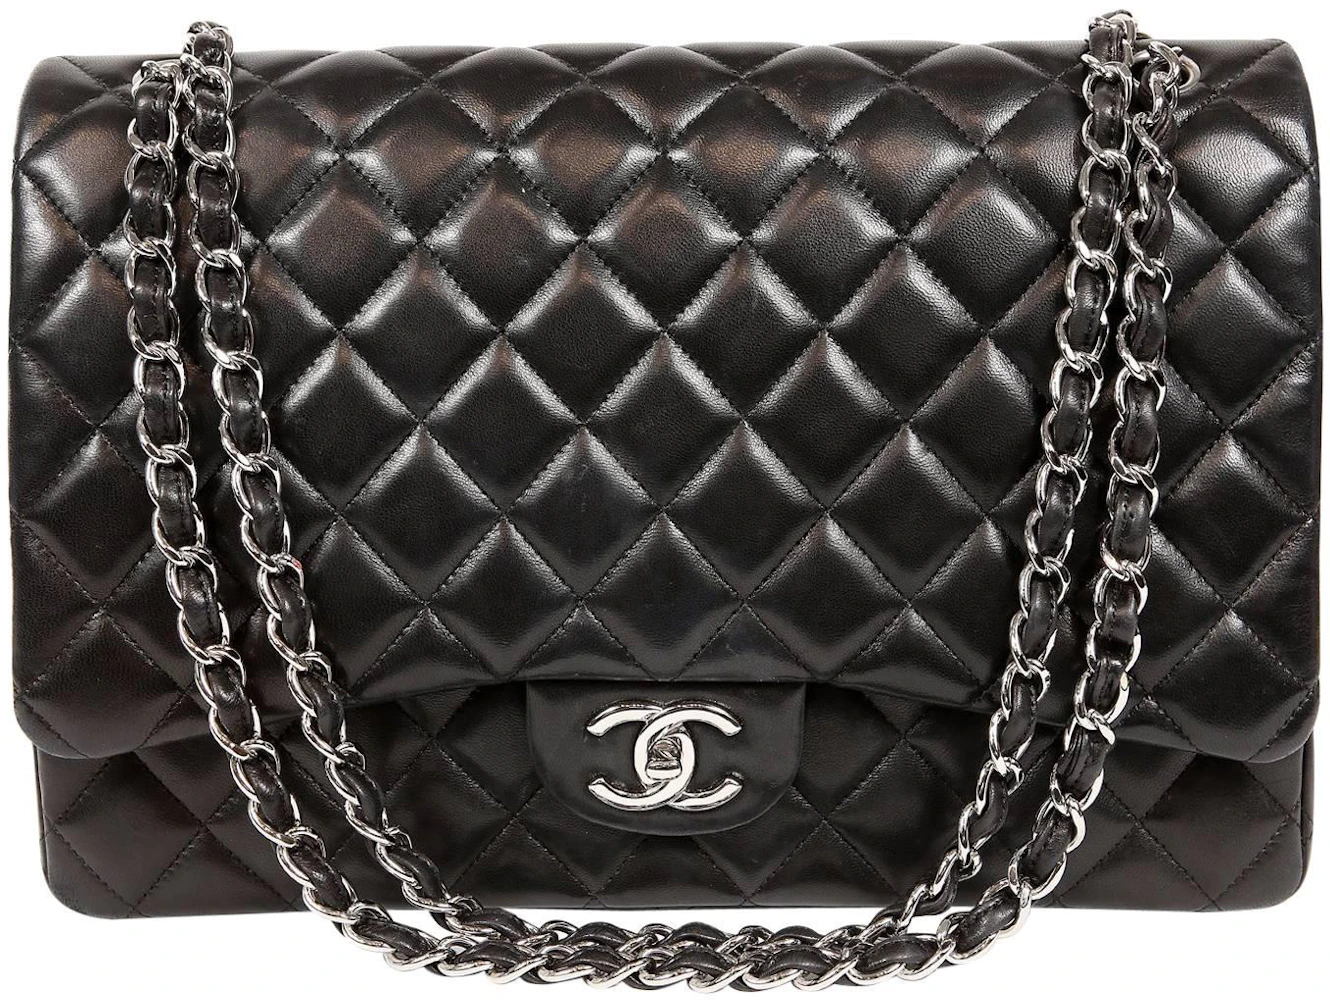 Chanel Red Quilted Glazed Soft Quilted Caviar Maxi Classic Double